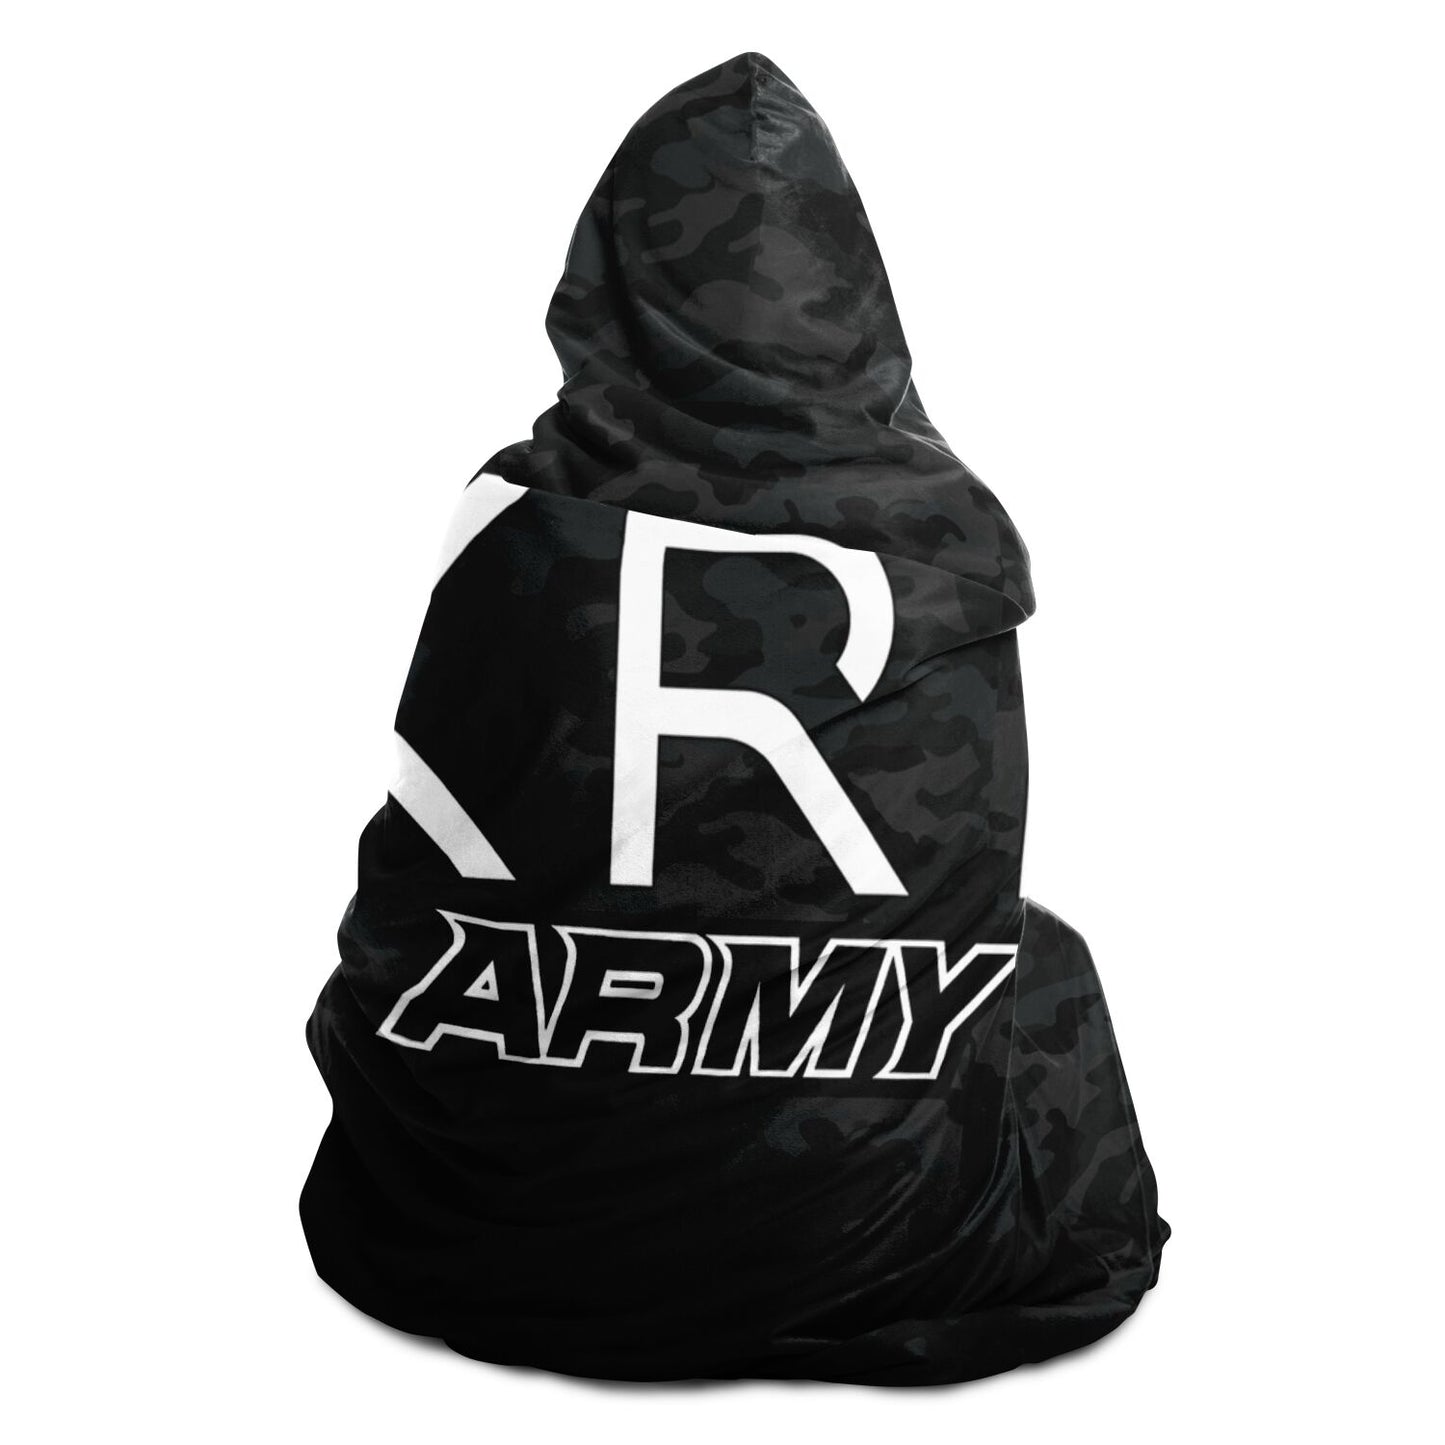 Xrp Army Dark Camo Hooded Blanket